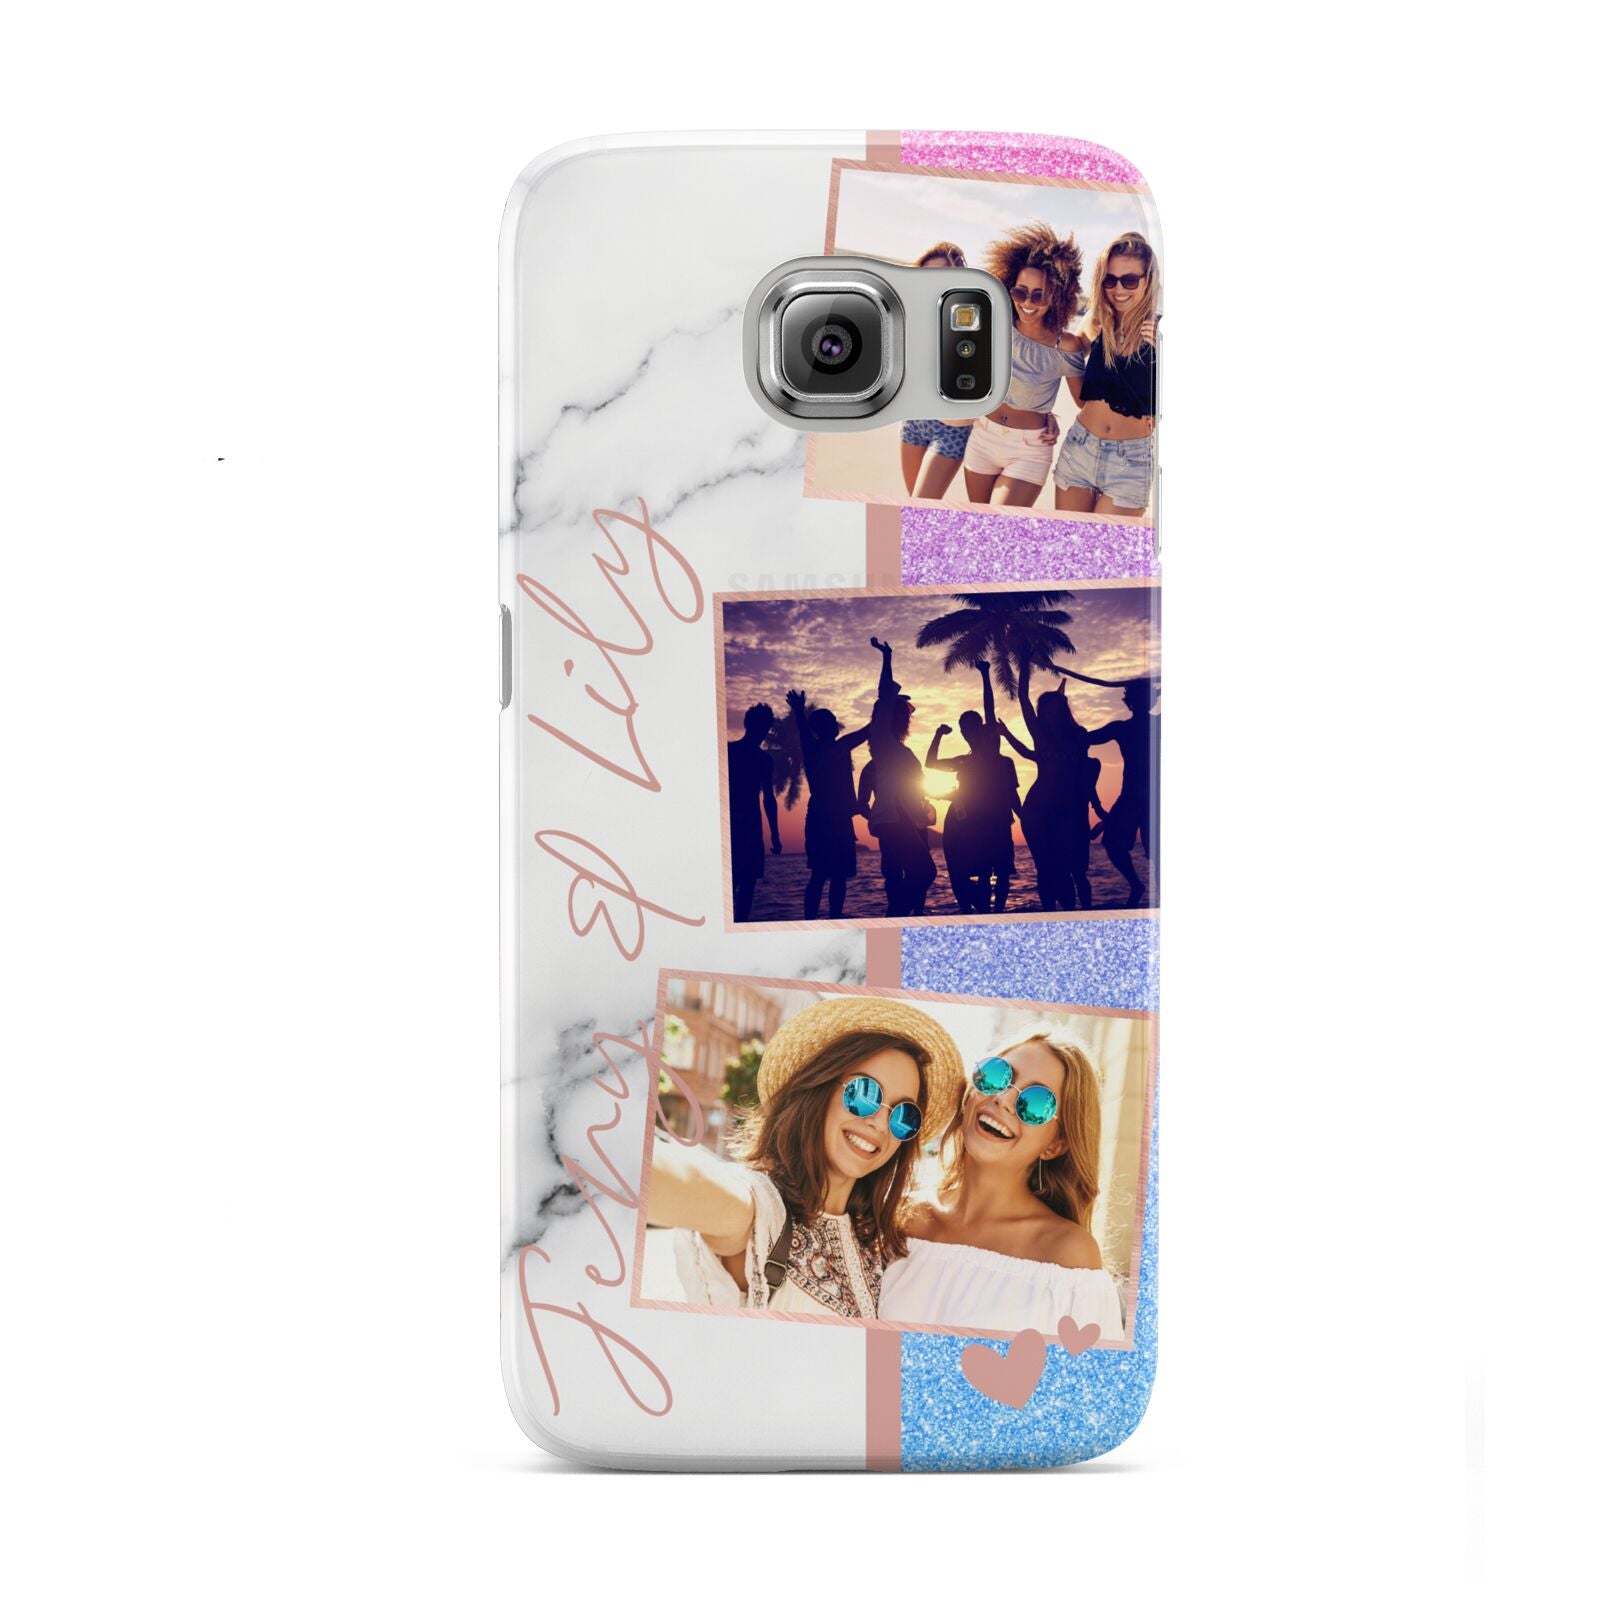 Glitter and Marble Photo Upload with Text Samsung Galaxy S6 Case